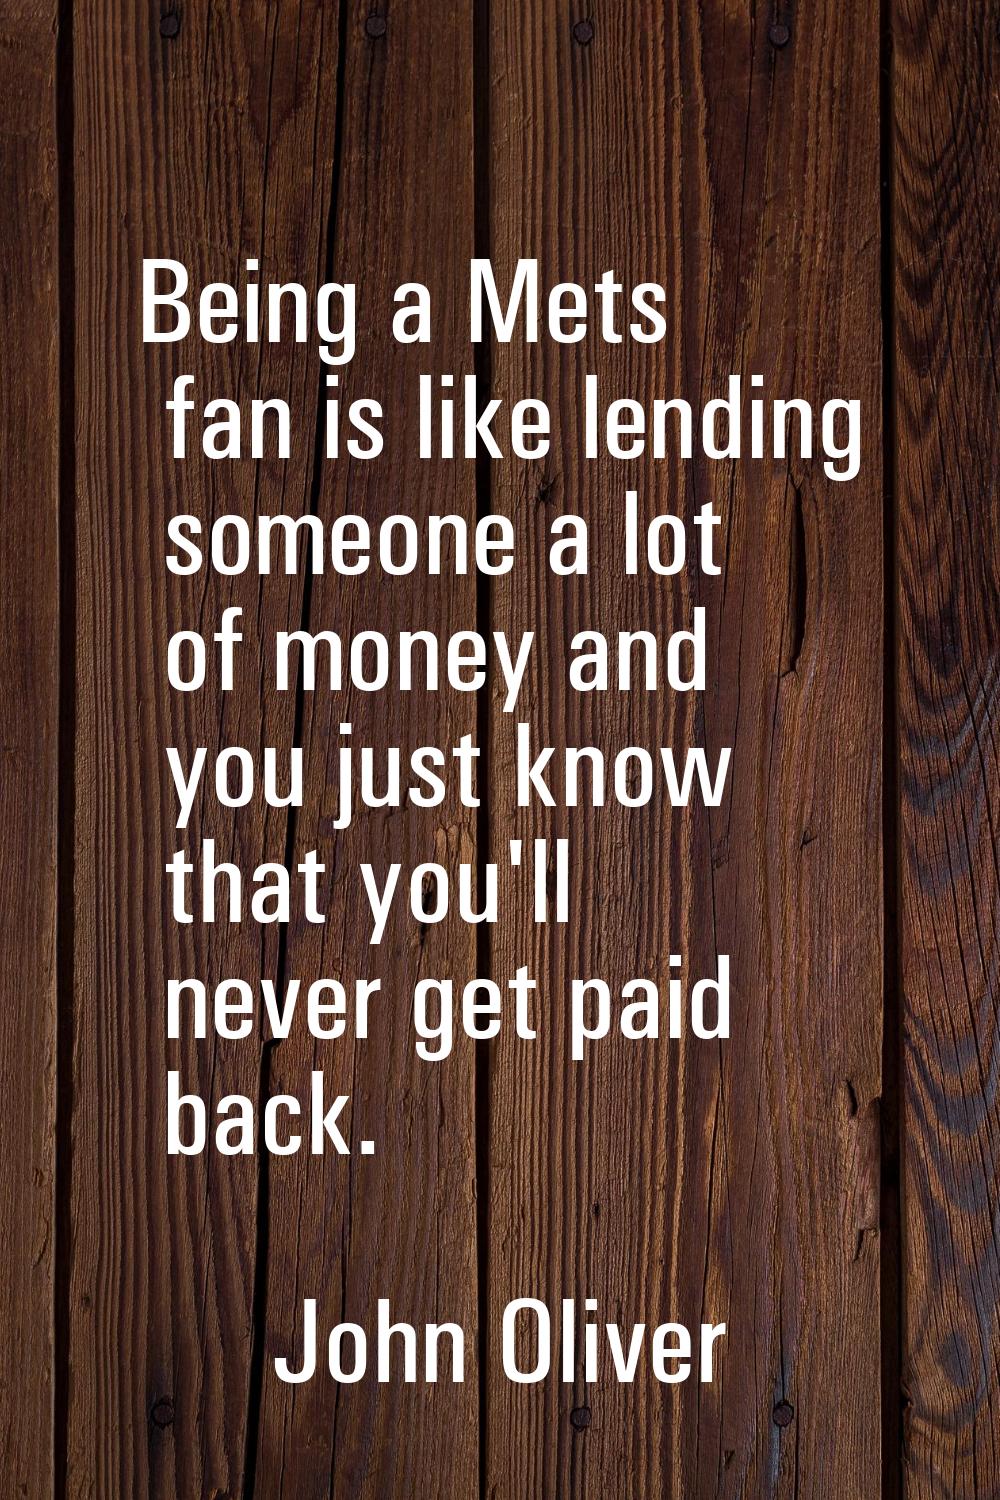 Being a Mets fan is like lending someone a lot of money and you just know that you'll never get pai